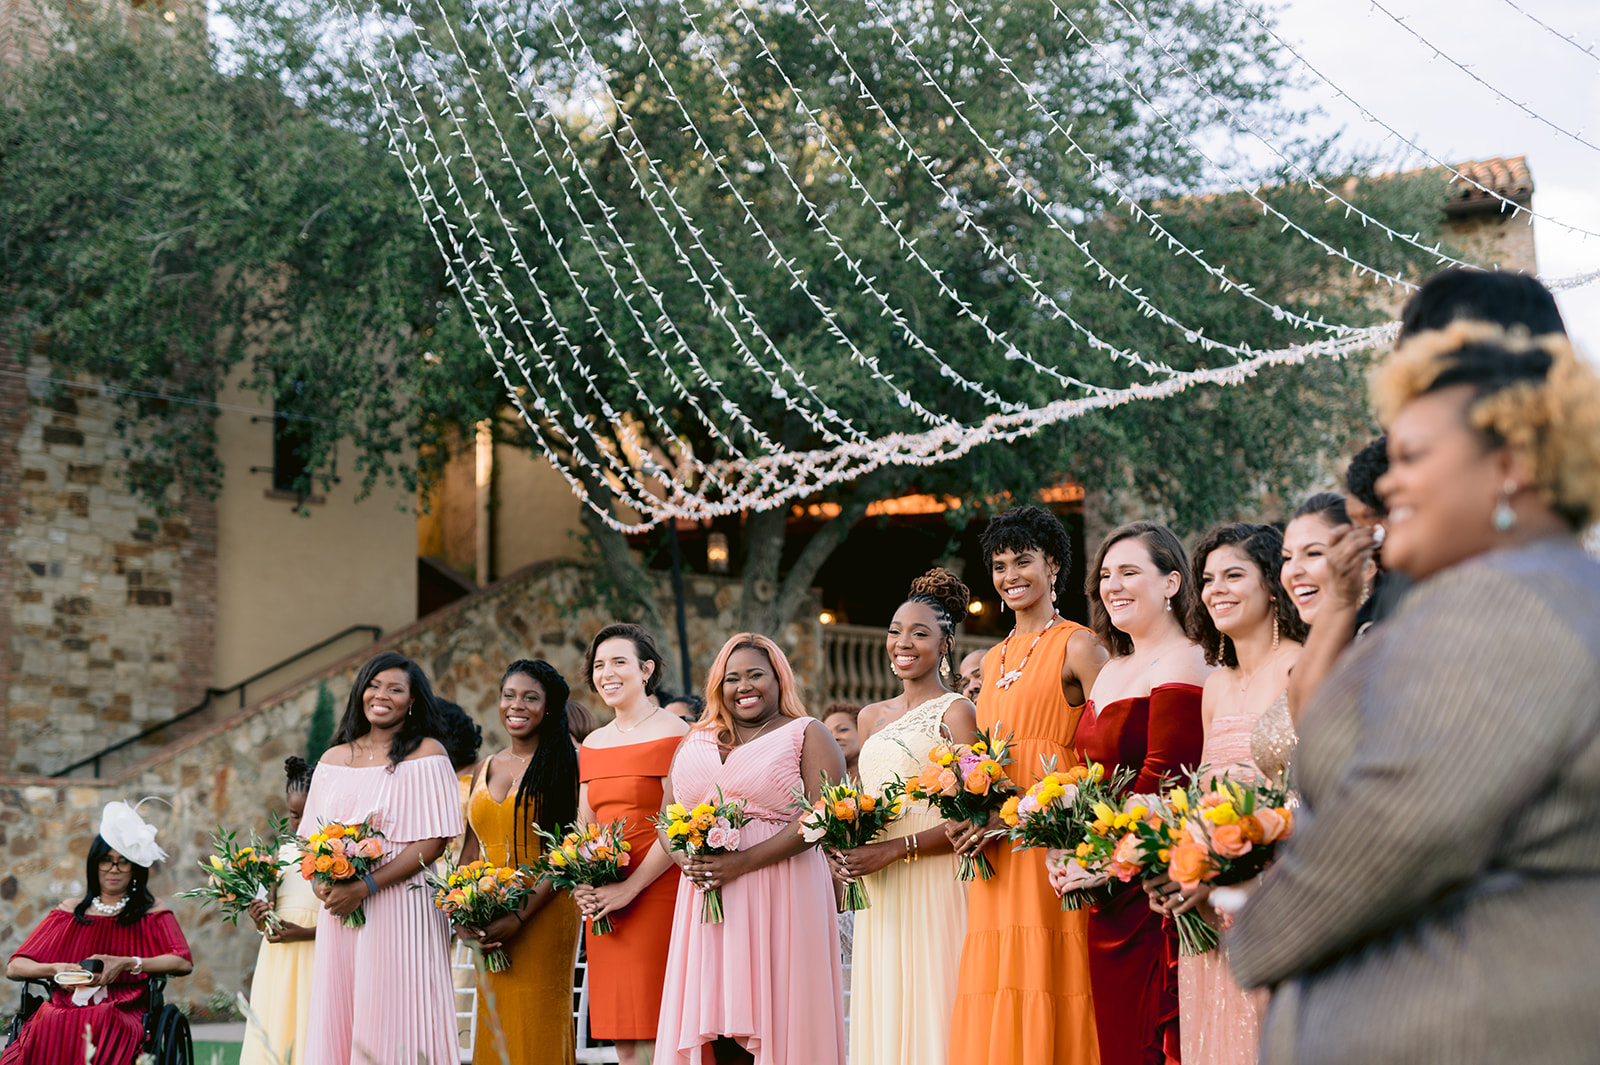 Bridesmaids in mismatched sunset colored dresses during the ceremony at Bella Collina.